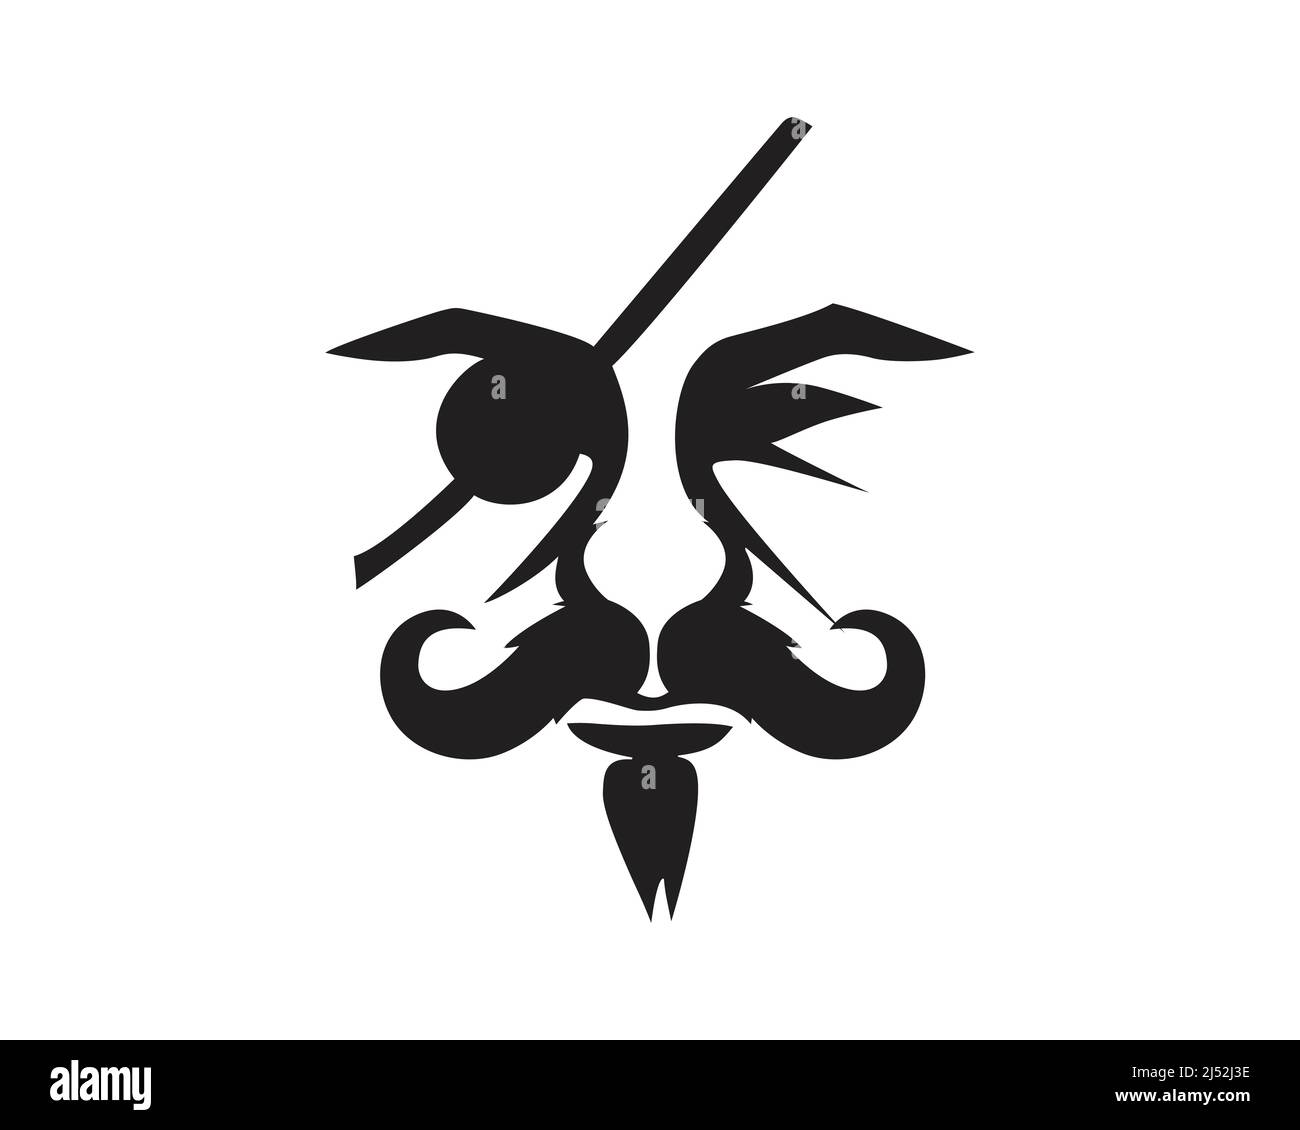 Pirate Face with Eyepatch and Calm Gesture Silhouette Stock Vector